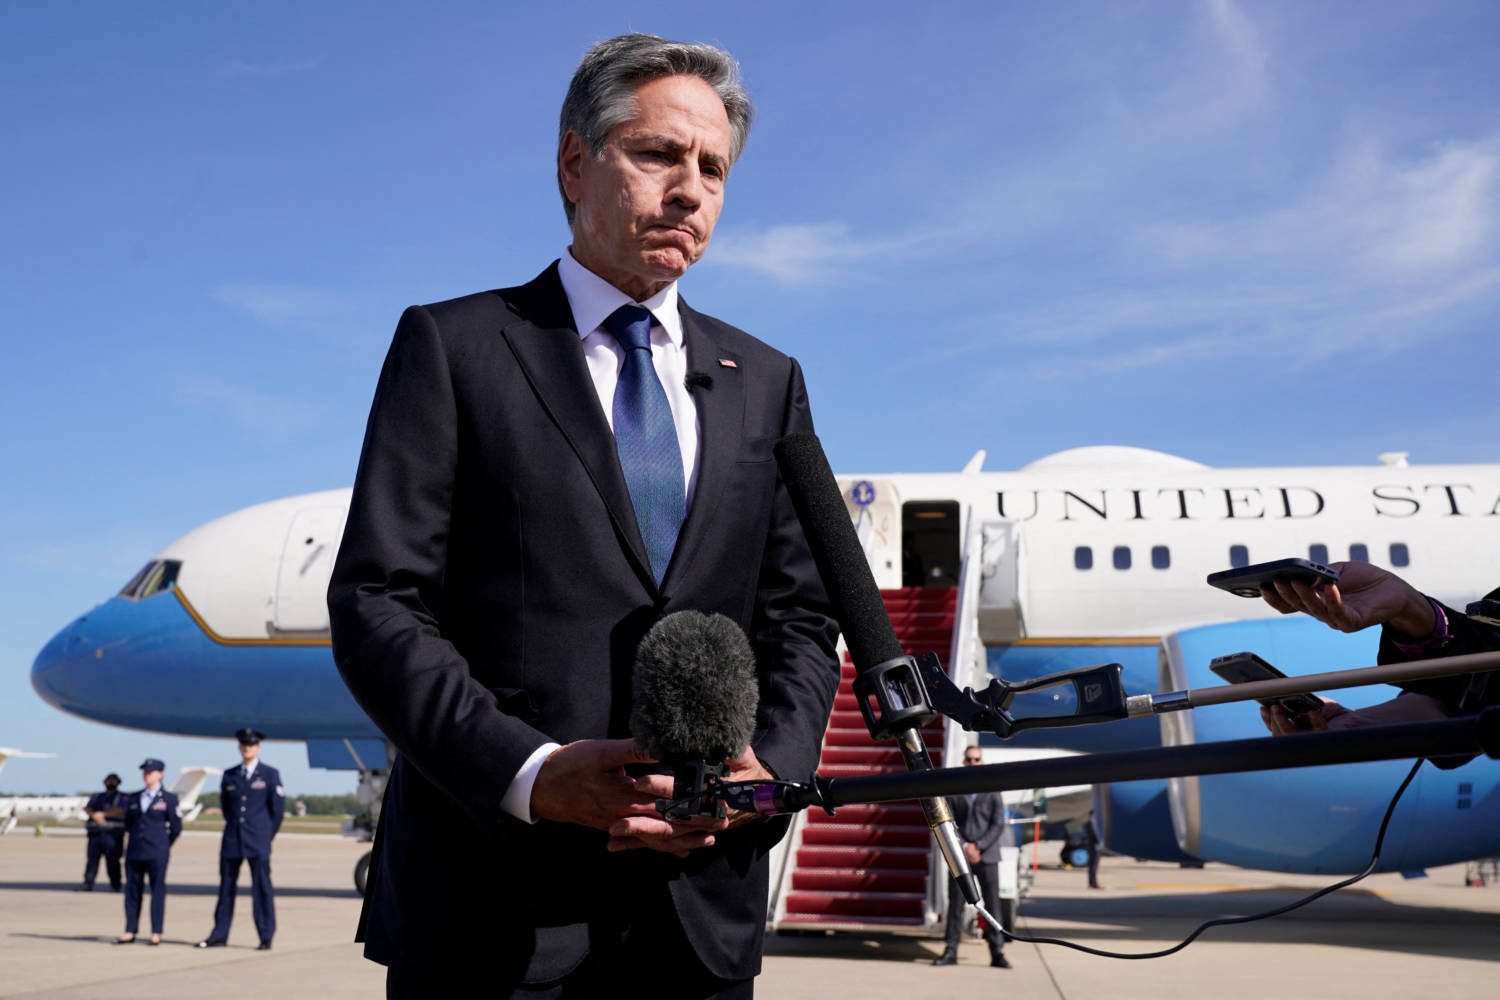 U.s. Secretary Of State Antony Blinken Speaks To Reporters Ahead Of His Departure On His Way To Israel, At Joint Base Andrew